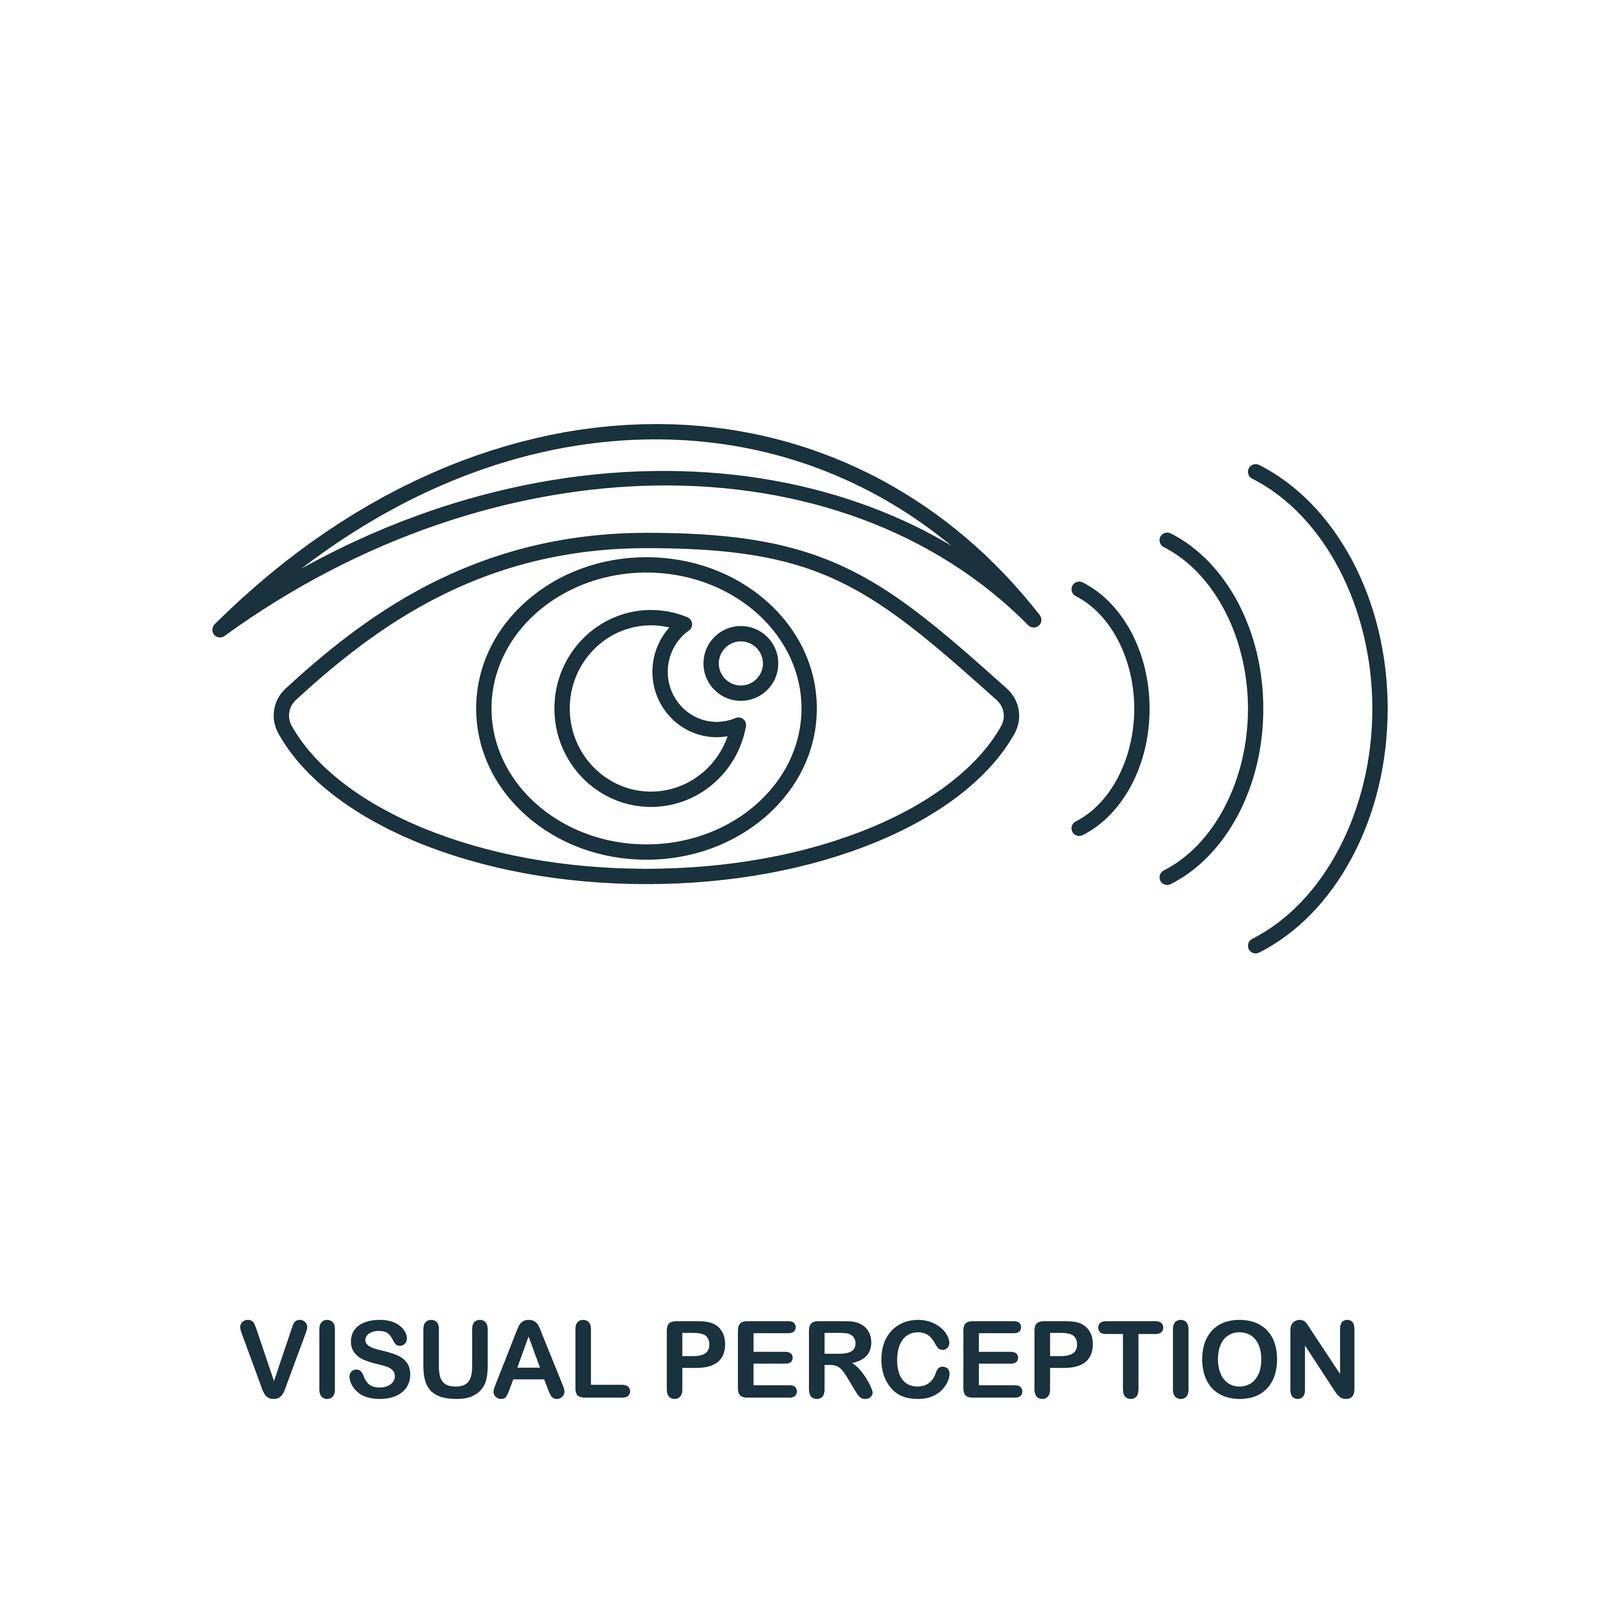 Visual Perception icon. Outline sign from cognitive skills collection. Line Visual Perception icon for infographics, wed design and more.